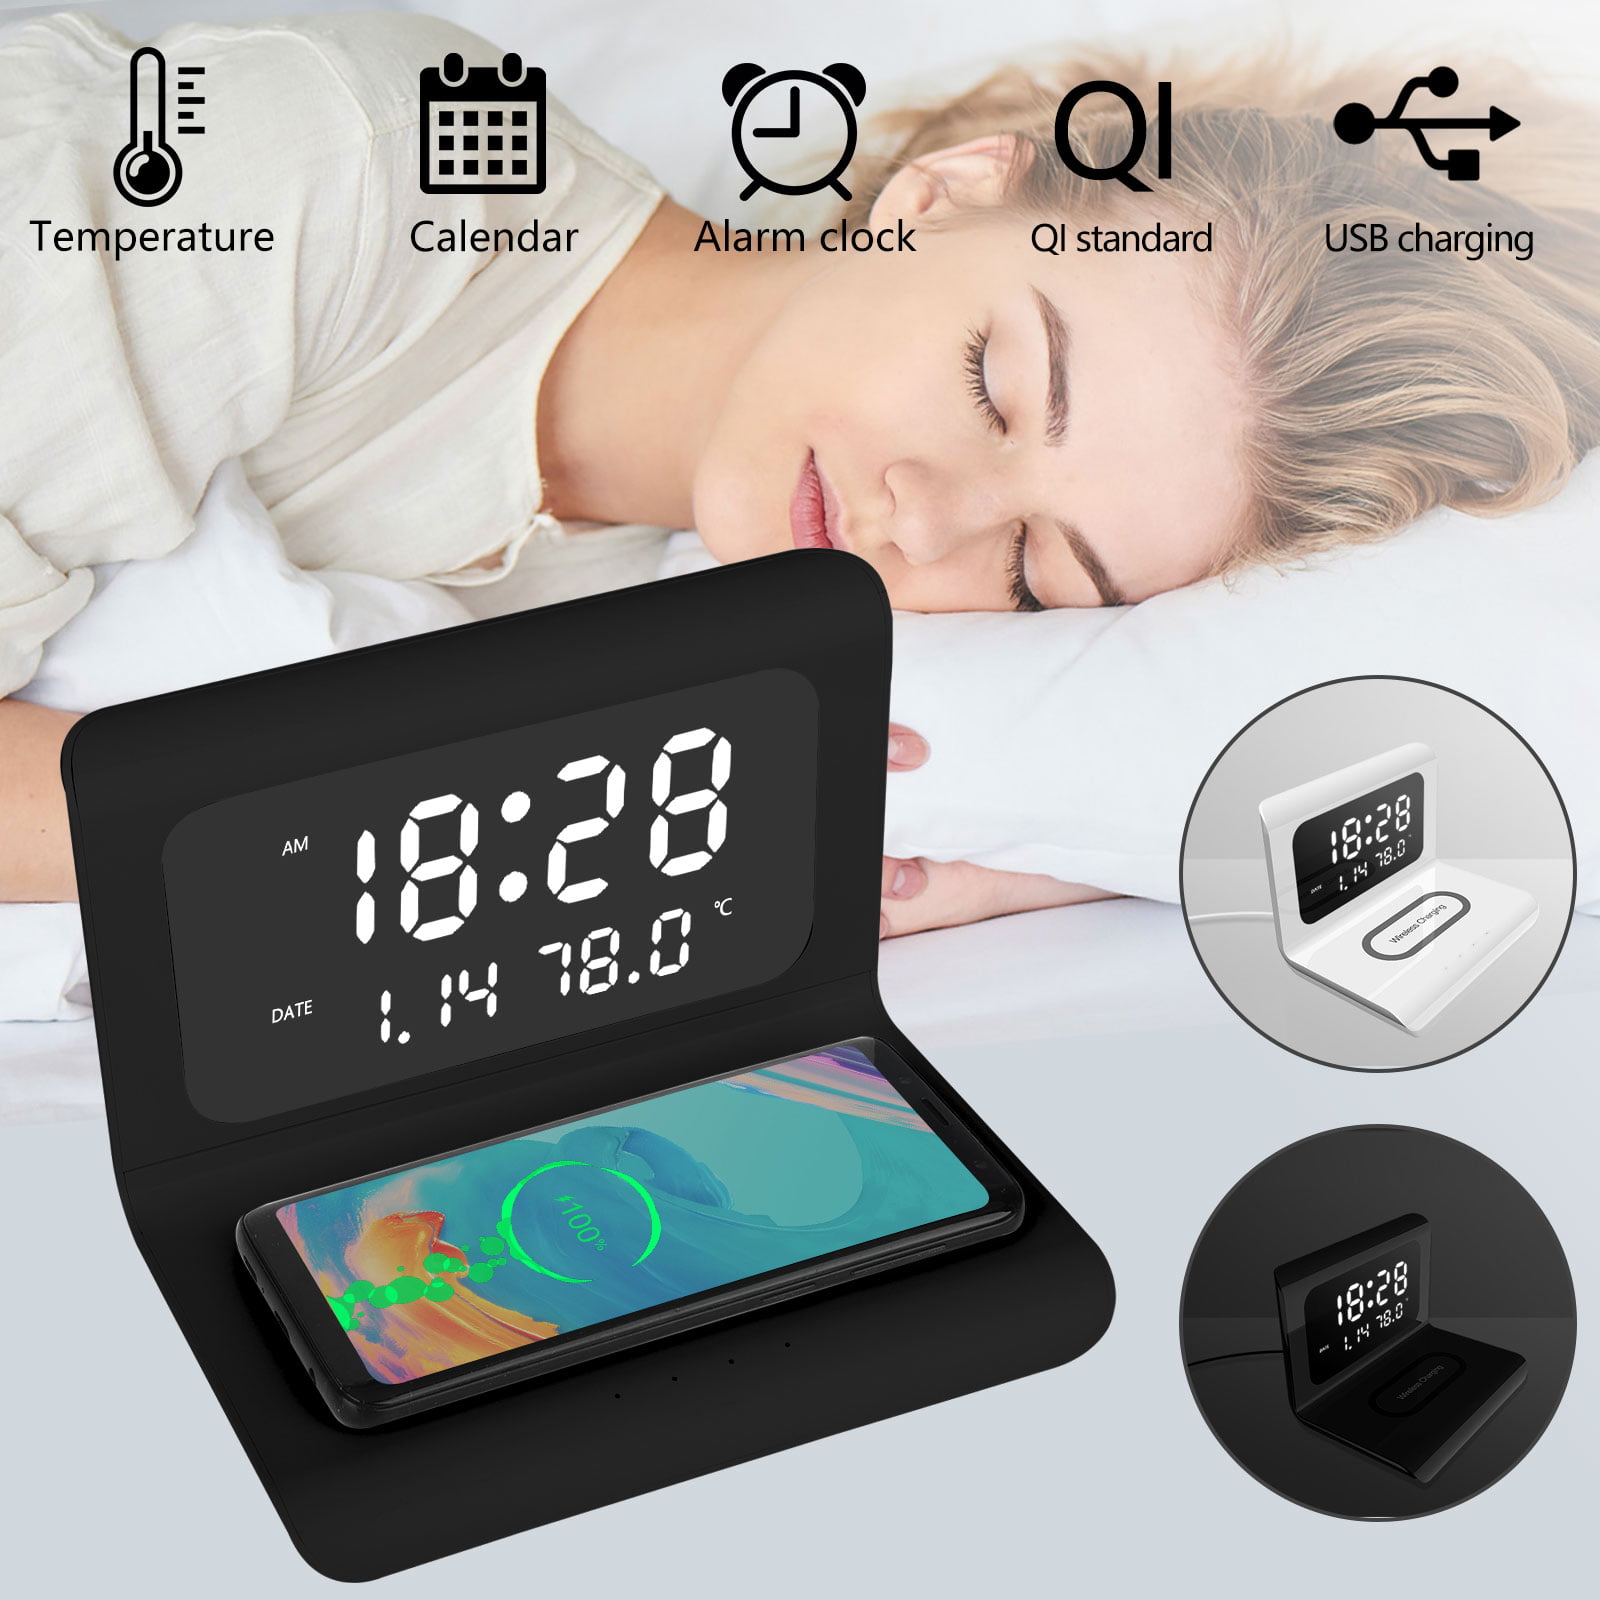 Digital Alarm Clock LED Date Time Temperature Display With Qi Wireless Charg Pad